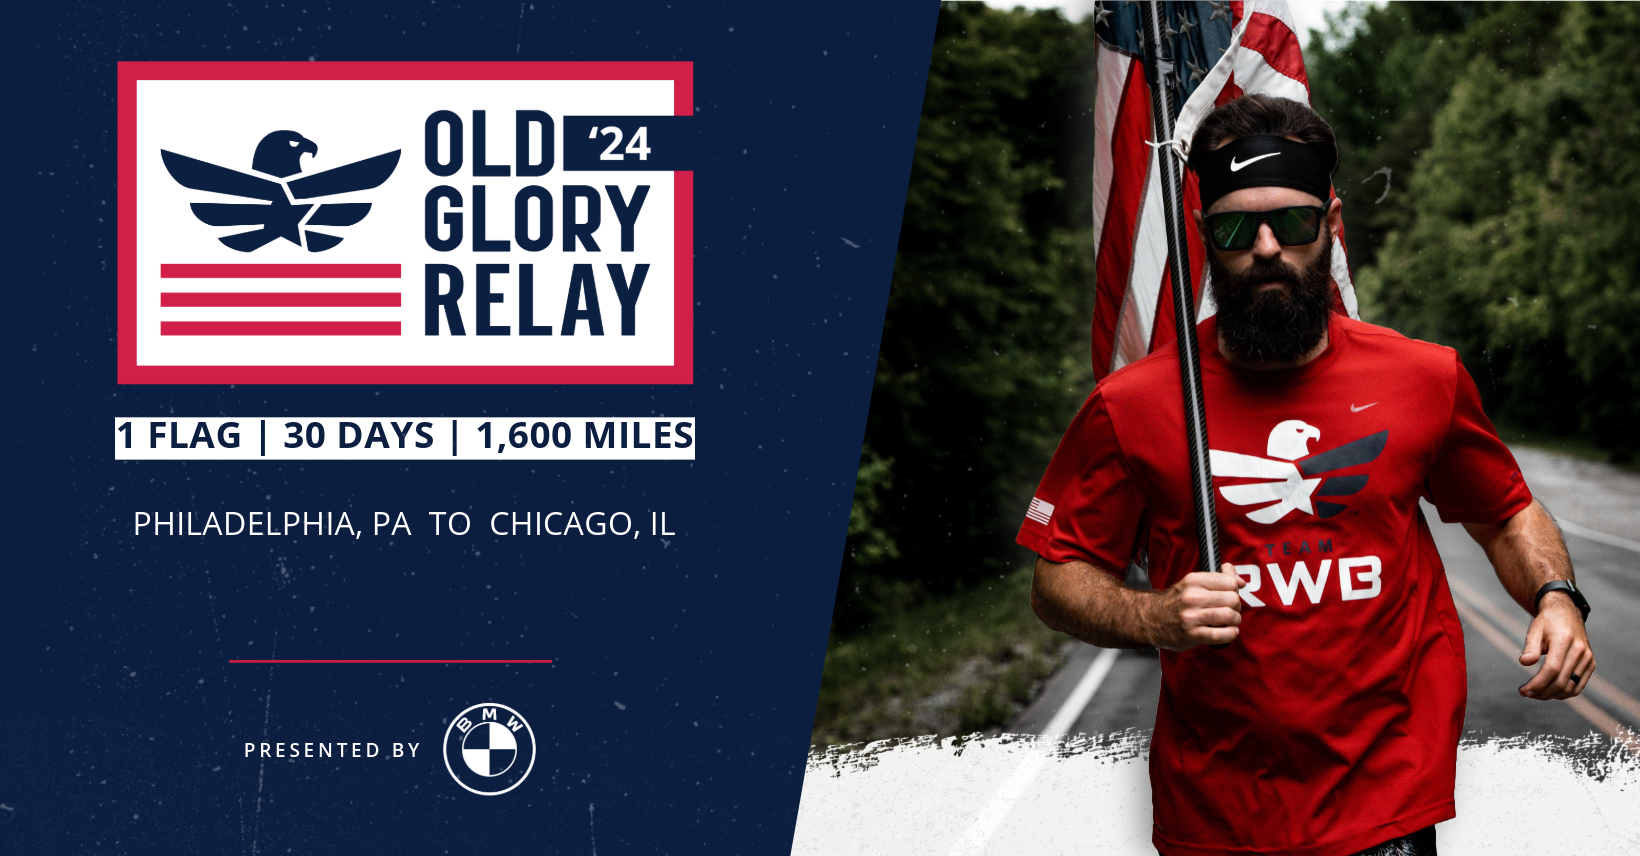 Man carrying flag while running in the Old Glory Relay by Team RWB. 1 flag, 30 days, 1,600 miles. From Philadelphia to Chicago.